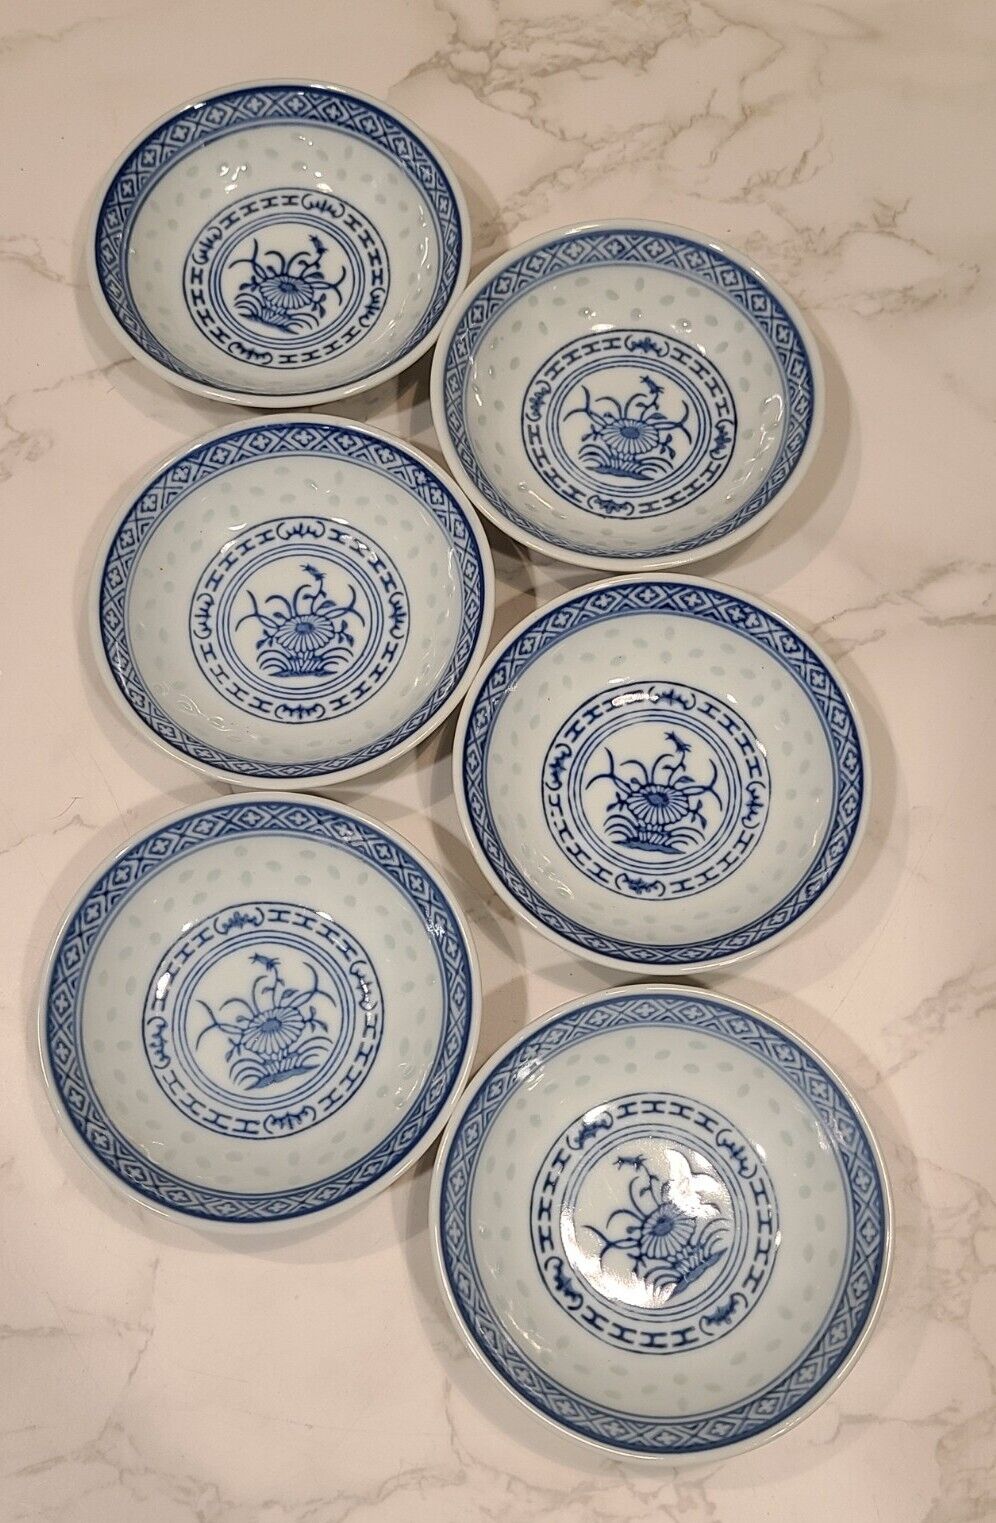 Translucent Chinese “Rice Grain” Blue White Porcelain Soy Dipping Bowls (6) EUC 